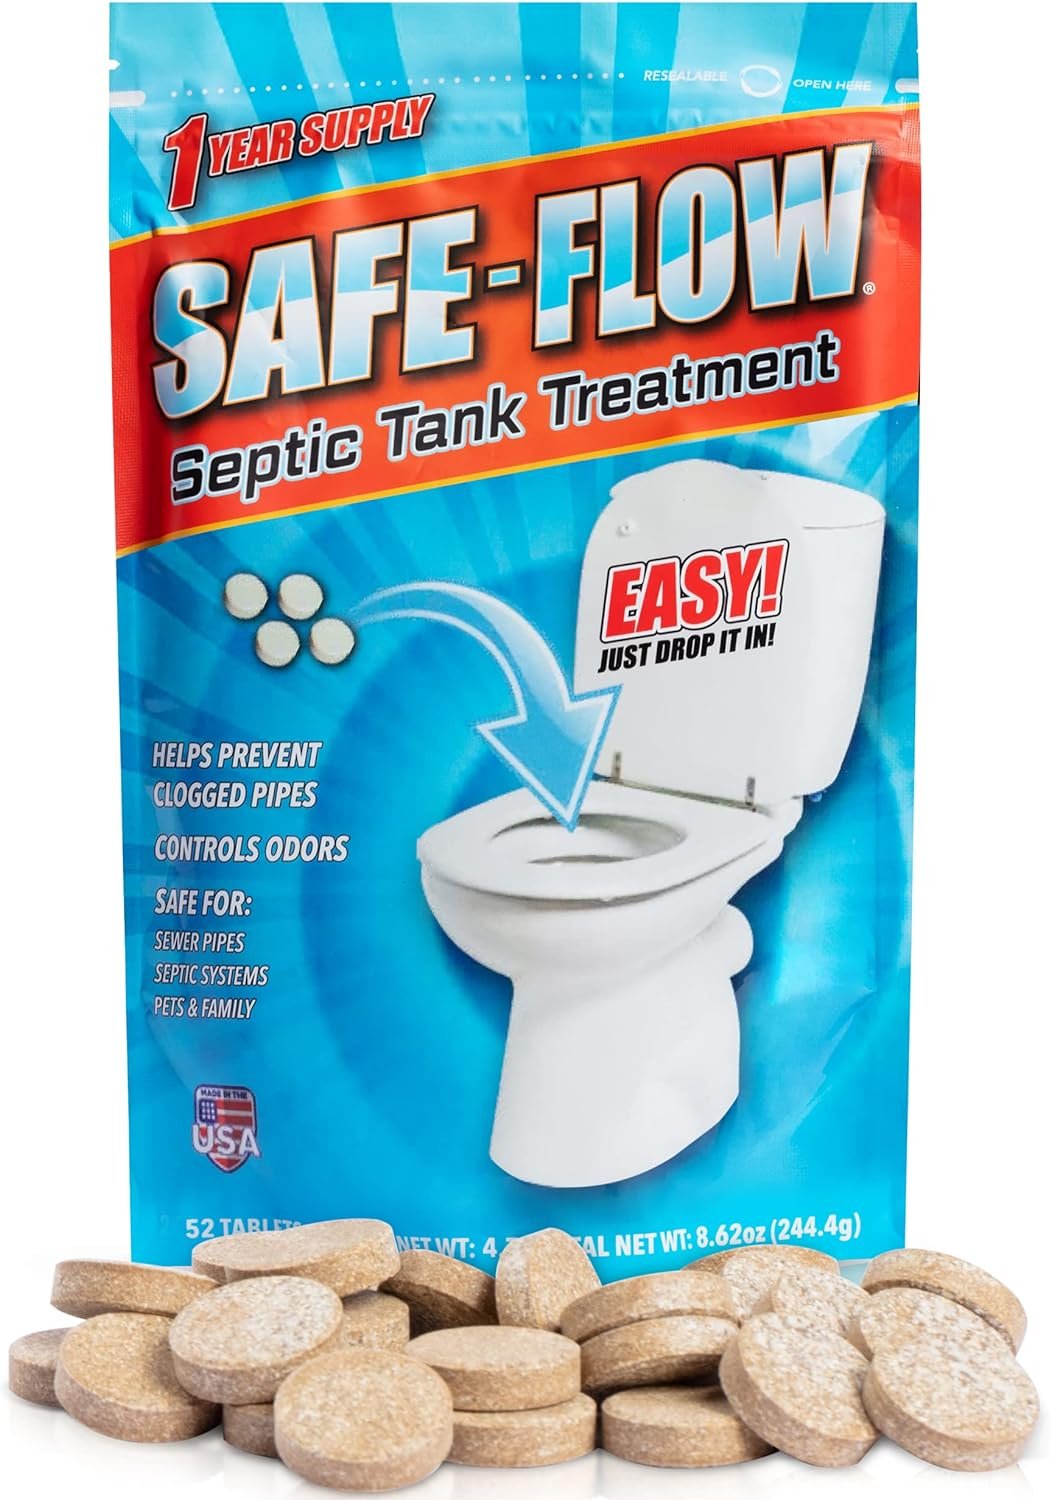 SAFE-FLOW Septic Tank Treatment - 1 Year Supply - 52 Ultra Concentrated Septic Tablets for Mess-Free Treatment - USA-Made Natural Formula for Easy System Maintenance and Smell Control